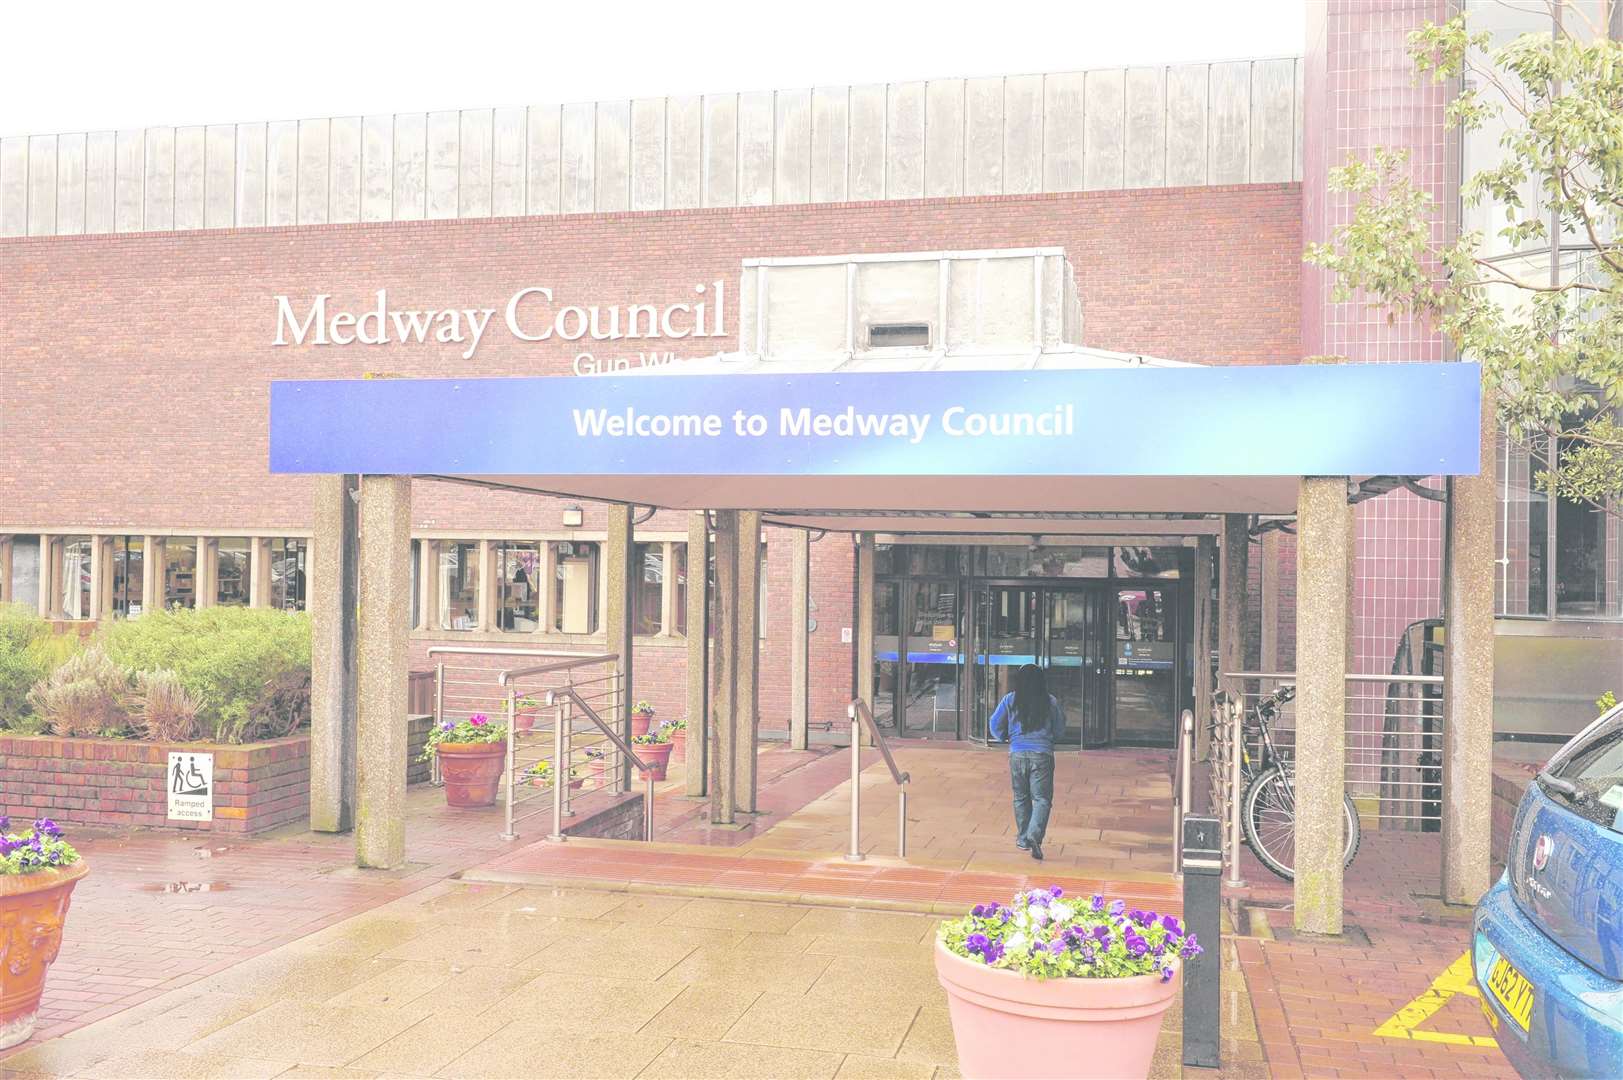 Medway Council's headquarters in Chatham